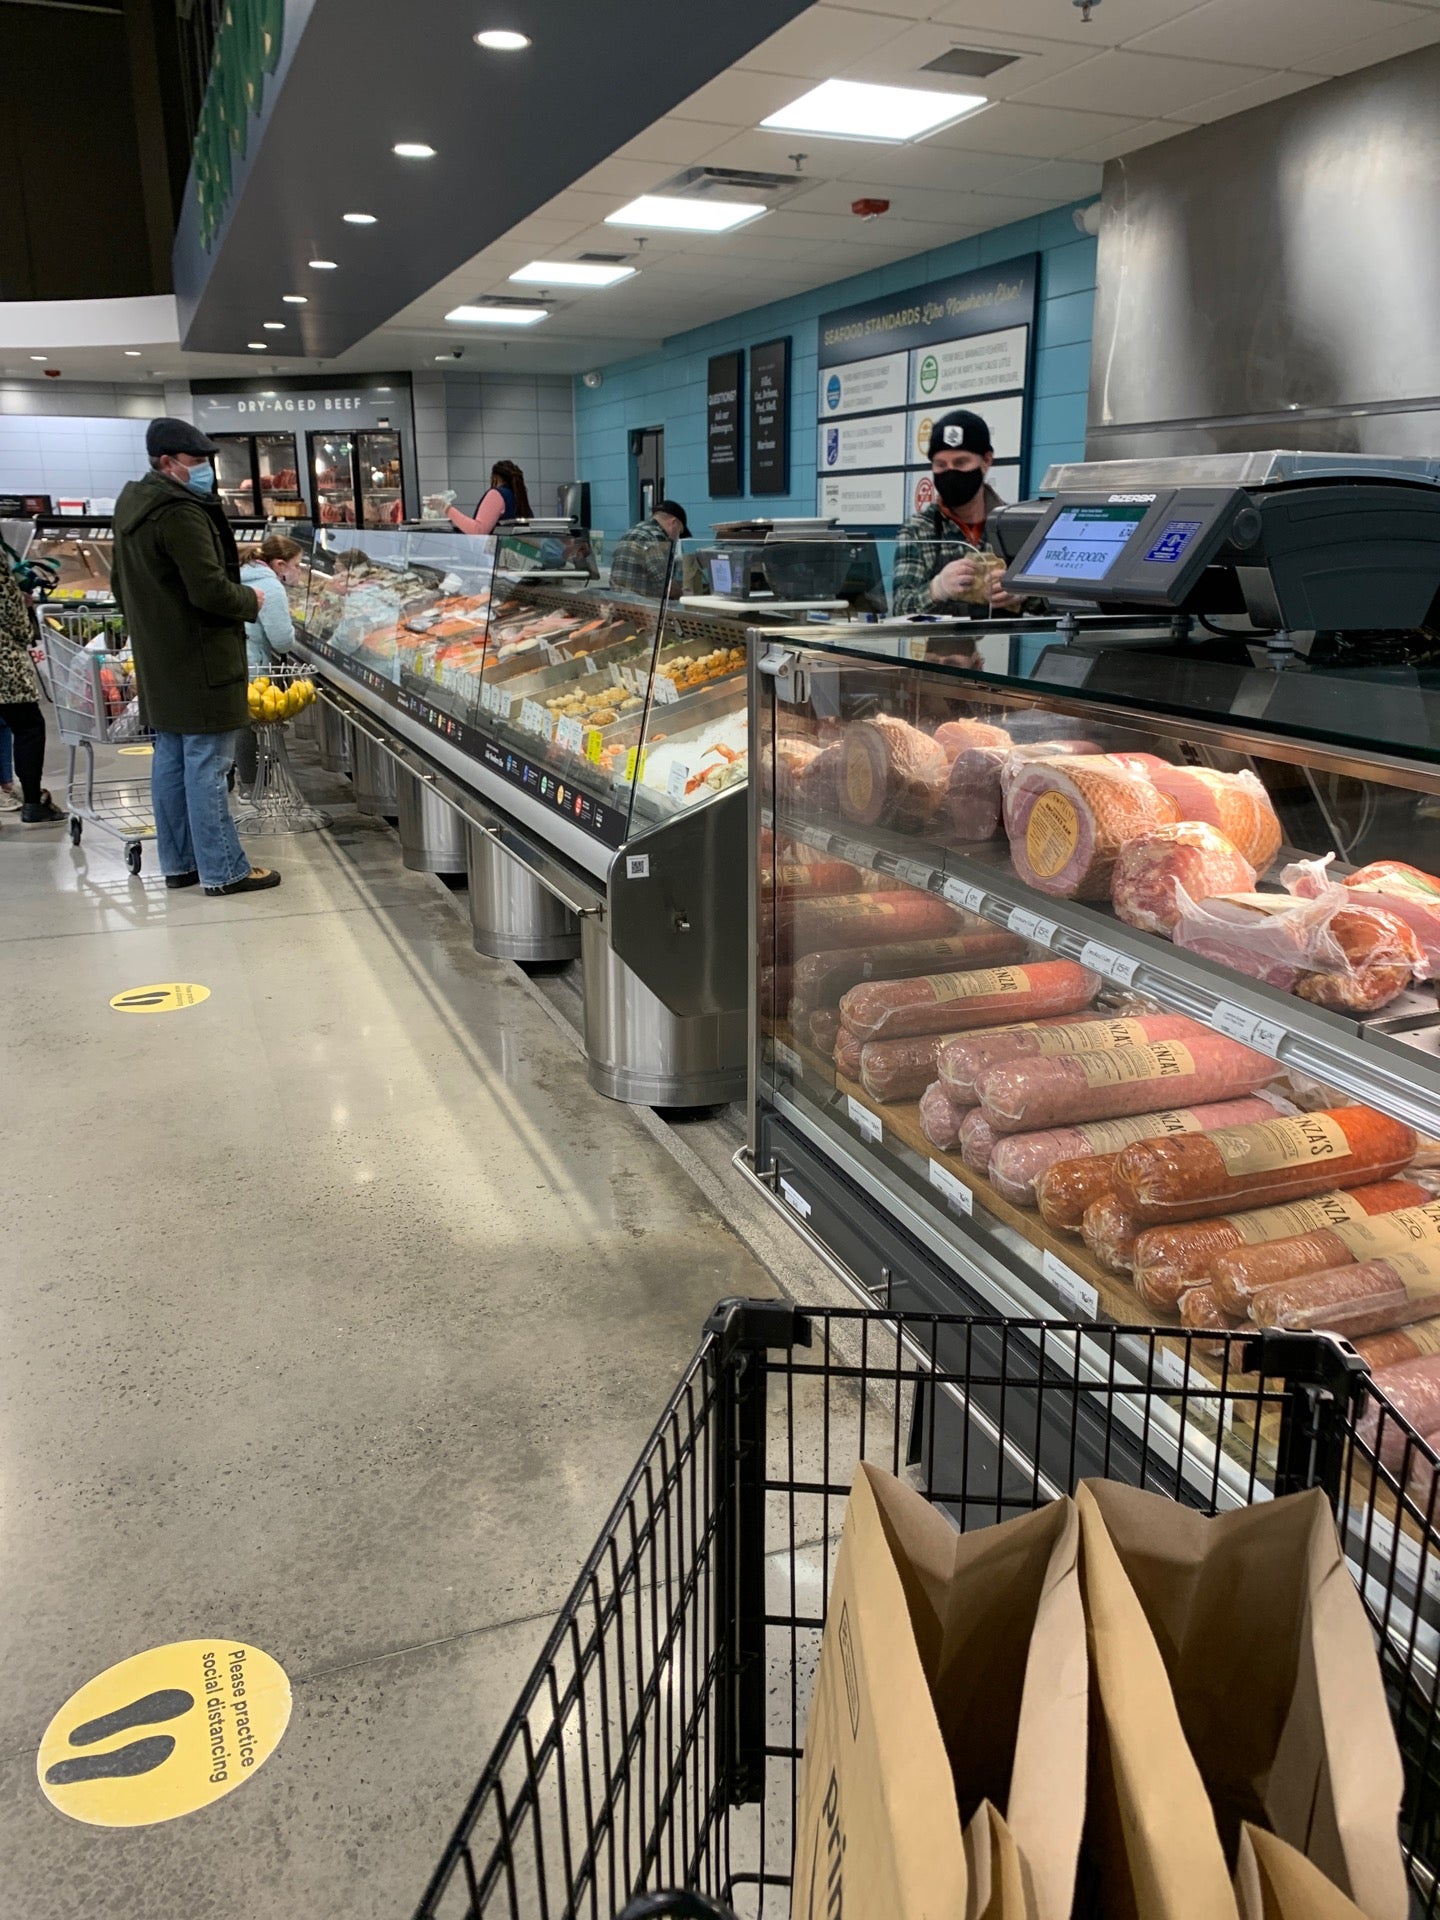 Prepared Dishes - Picture of Whole Foods Market, New York City - Tripadvisor